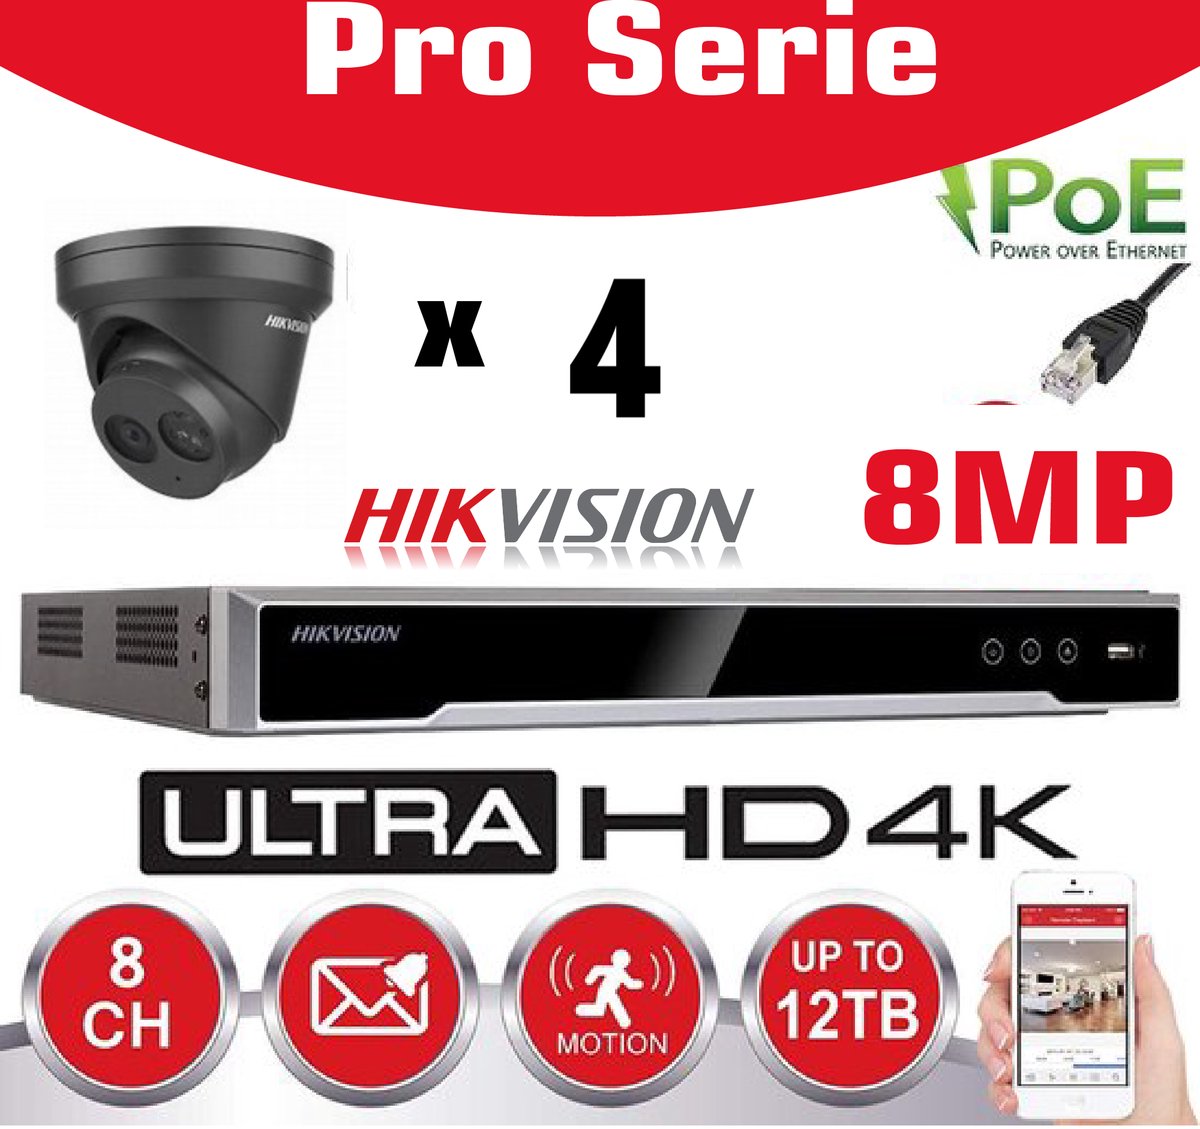 HIKVISION 8MP Bewakingscamera Kit Pro Serie - NVR 8Ch 4K UHD IP POE - 4x 8MP IP TURRET CAMERA Pro-Serie In/Buiten Nachtzicht IR Tot 30m - 2TB HDD Opslag